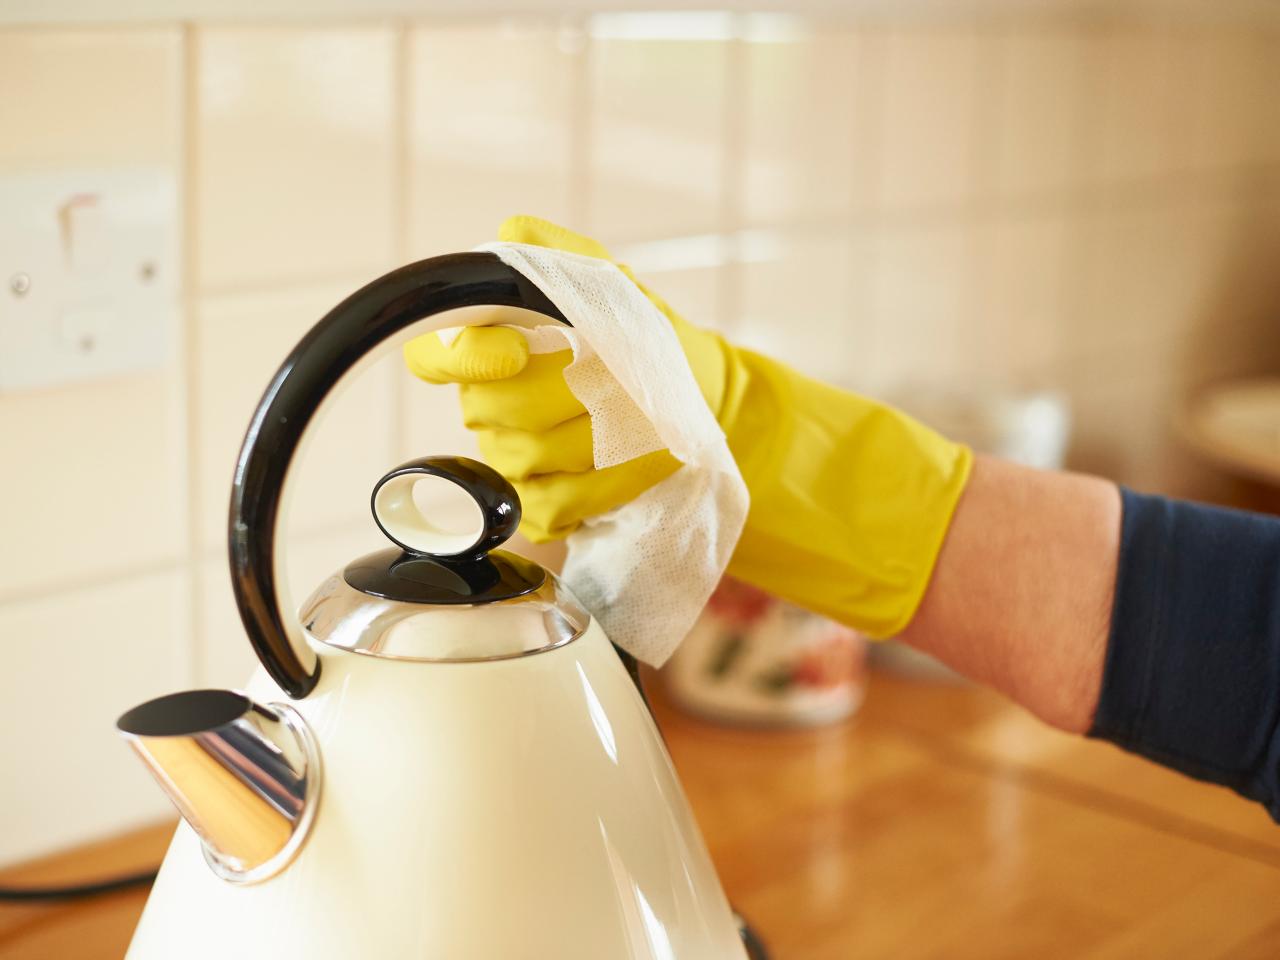 https://food.fnr.sndimg.com/content/dam/images/food/fullset/2023/2/28/electric-tea-kettle-cleaning-with-dish-glove.jpg.rend.hgtvcom.1280.960.suffix/1677616000743.jpeg